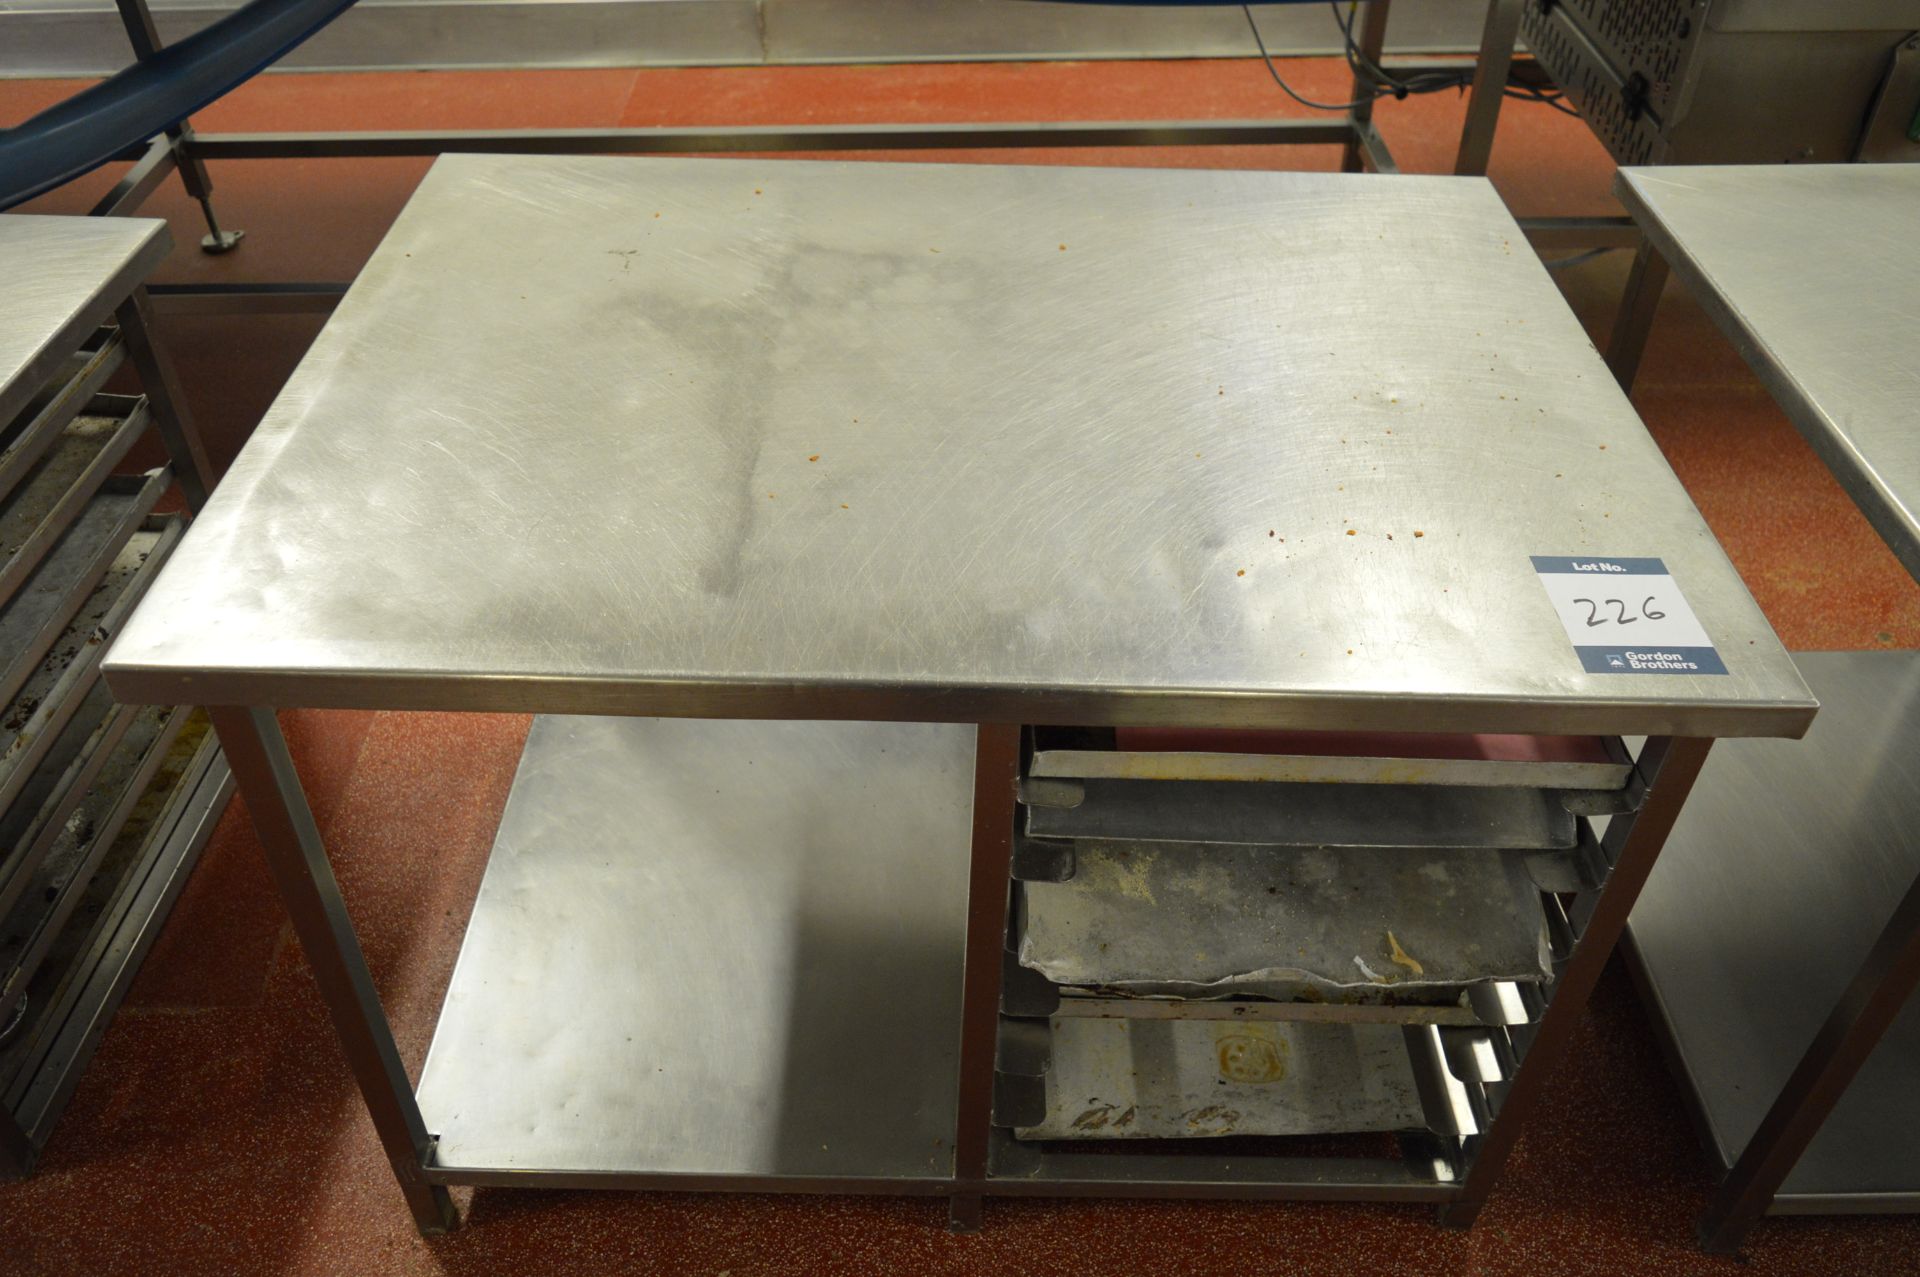 Stainless steel work bench with tray storage, 1.15m (w) x 0.86m (d) x 0.74m (h) (Located at Crantock